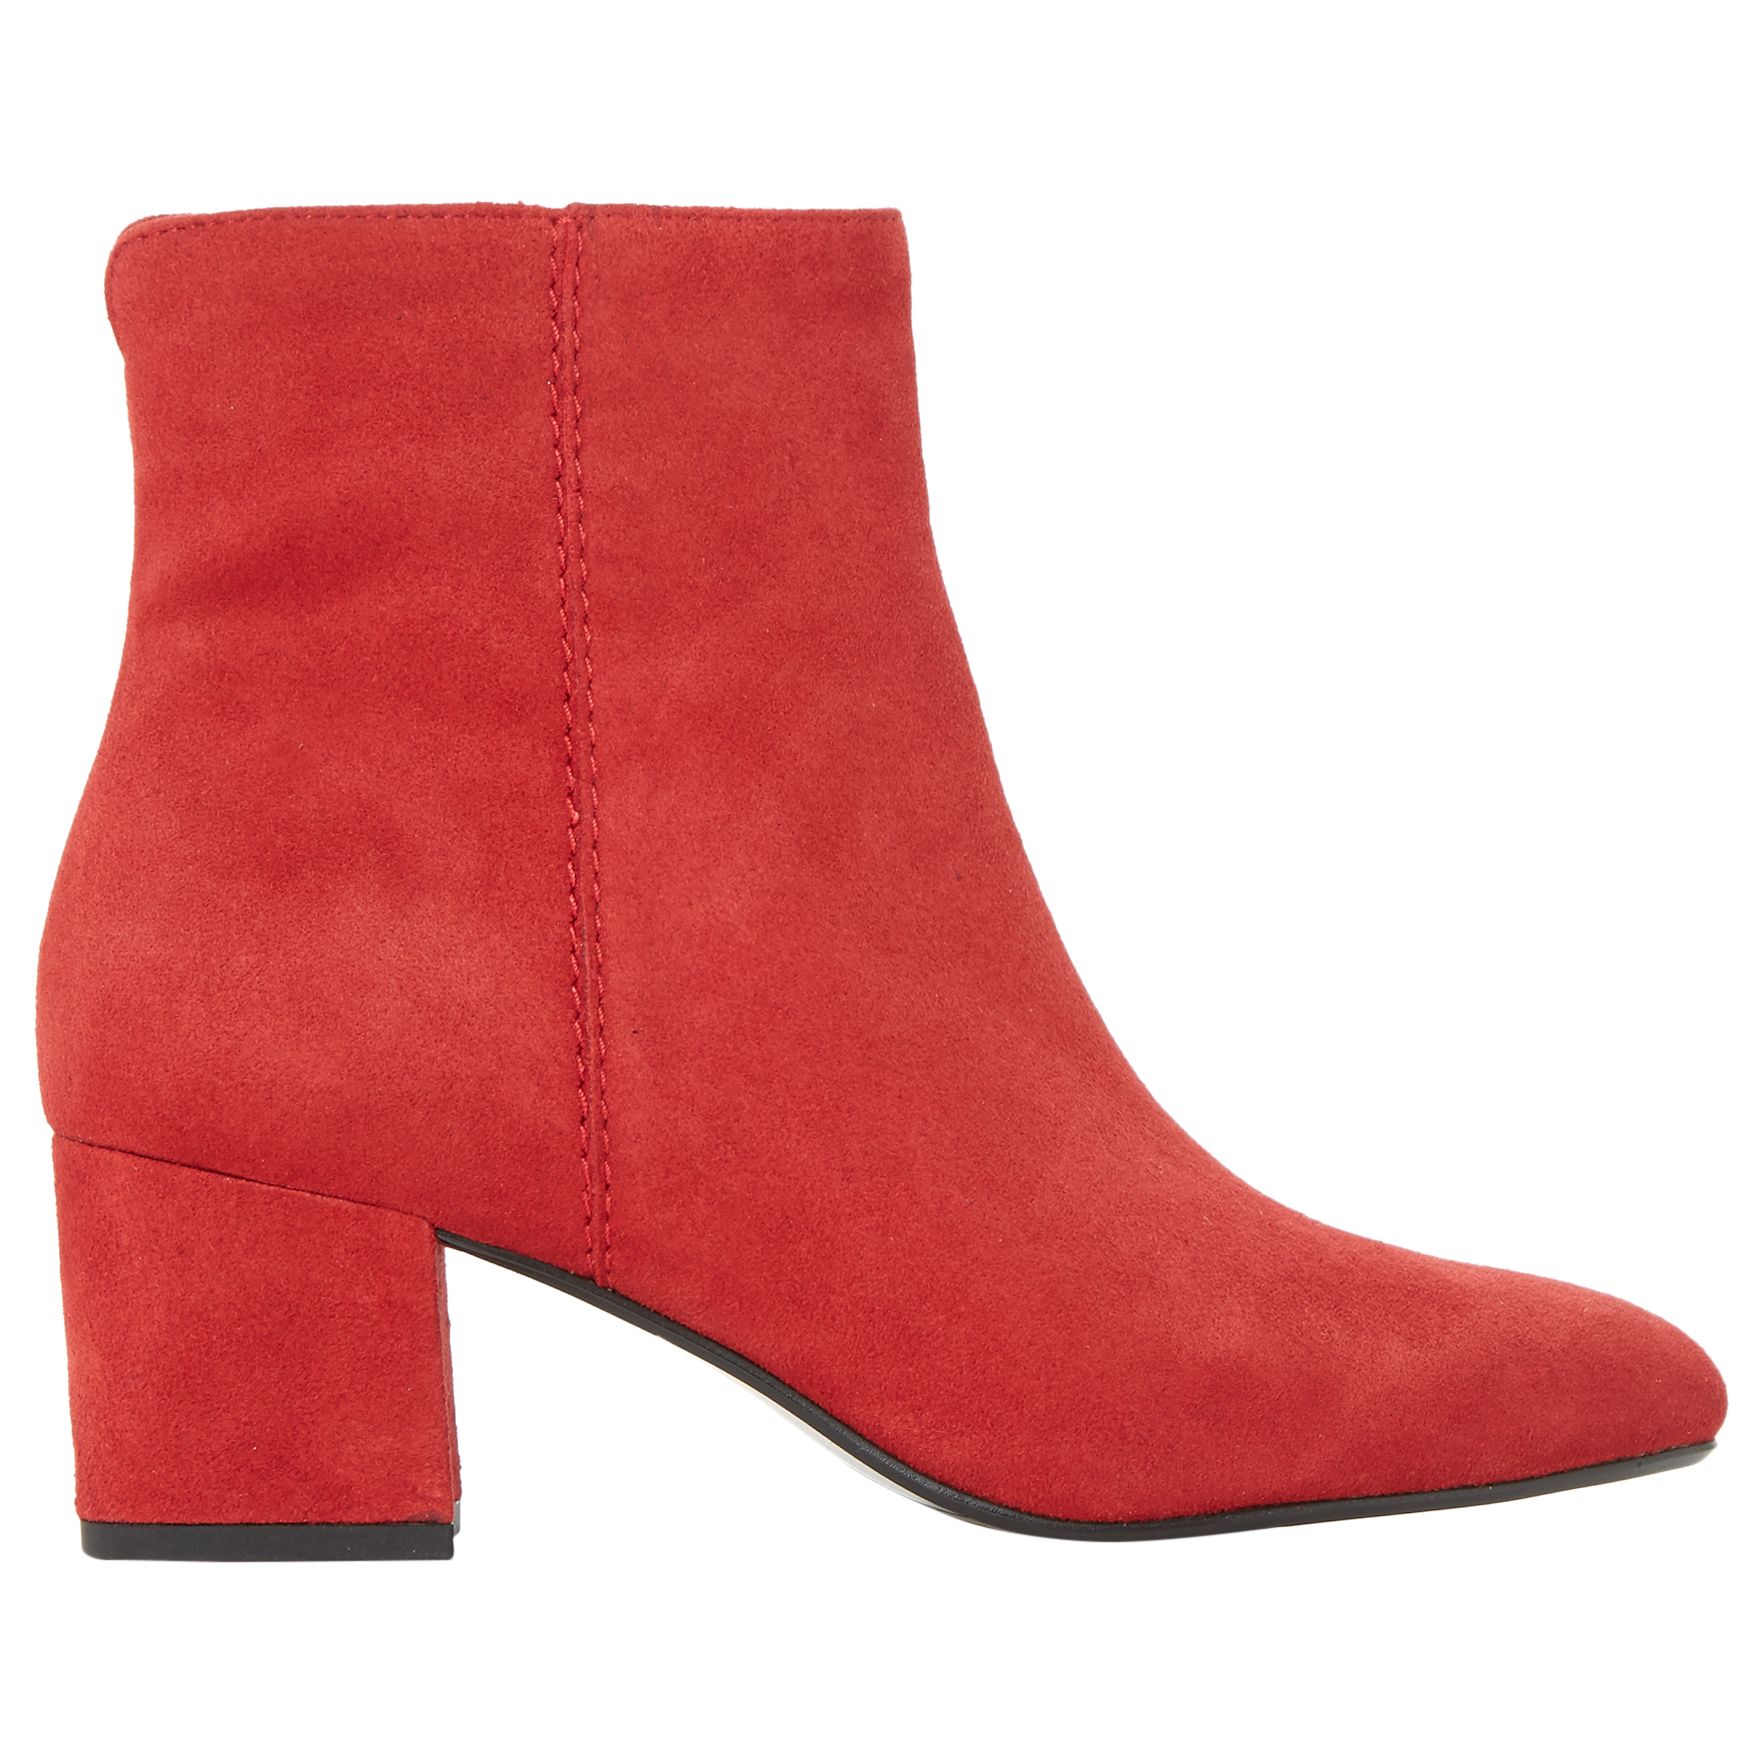 Dune Olyvea Block Heeled Ankle Boots, Red Suede, 3